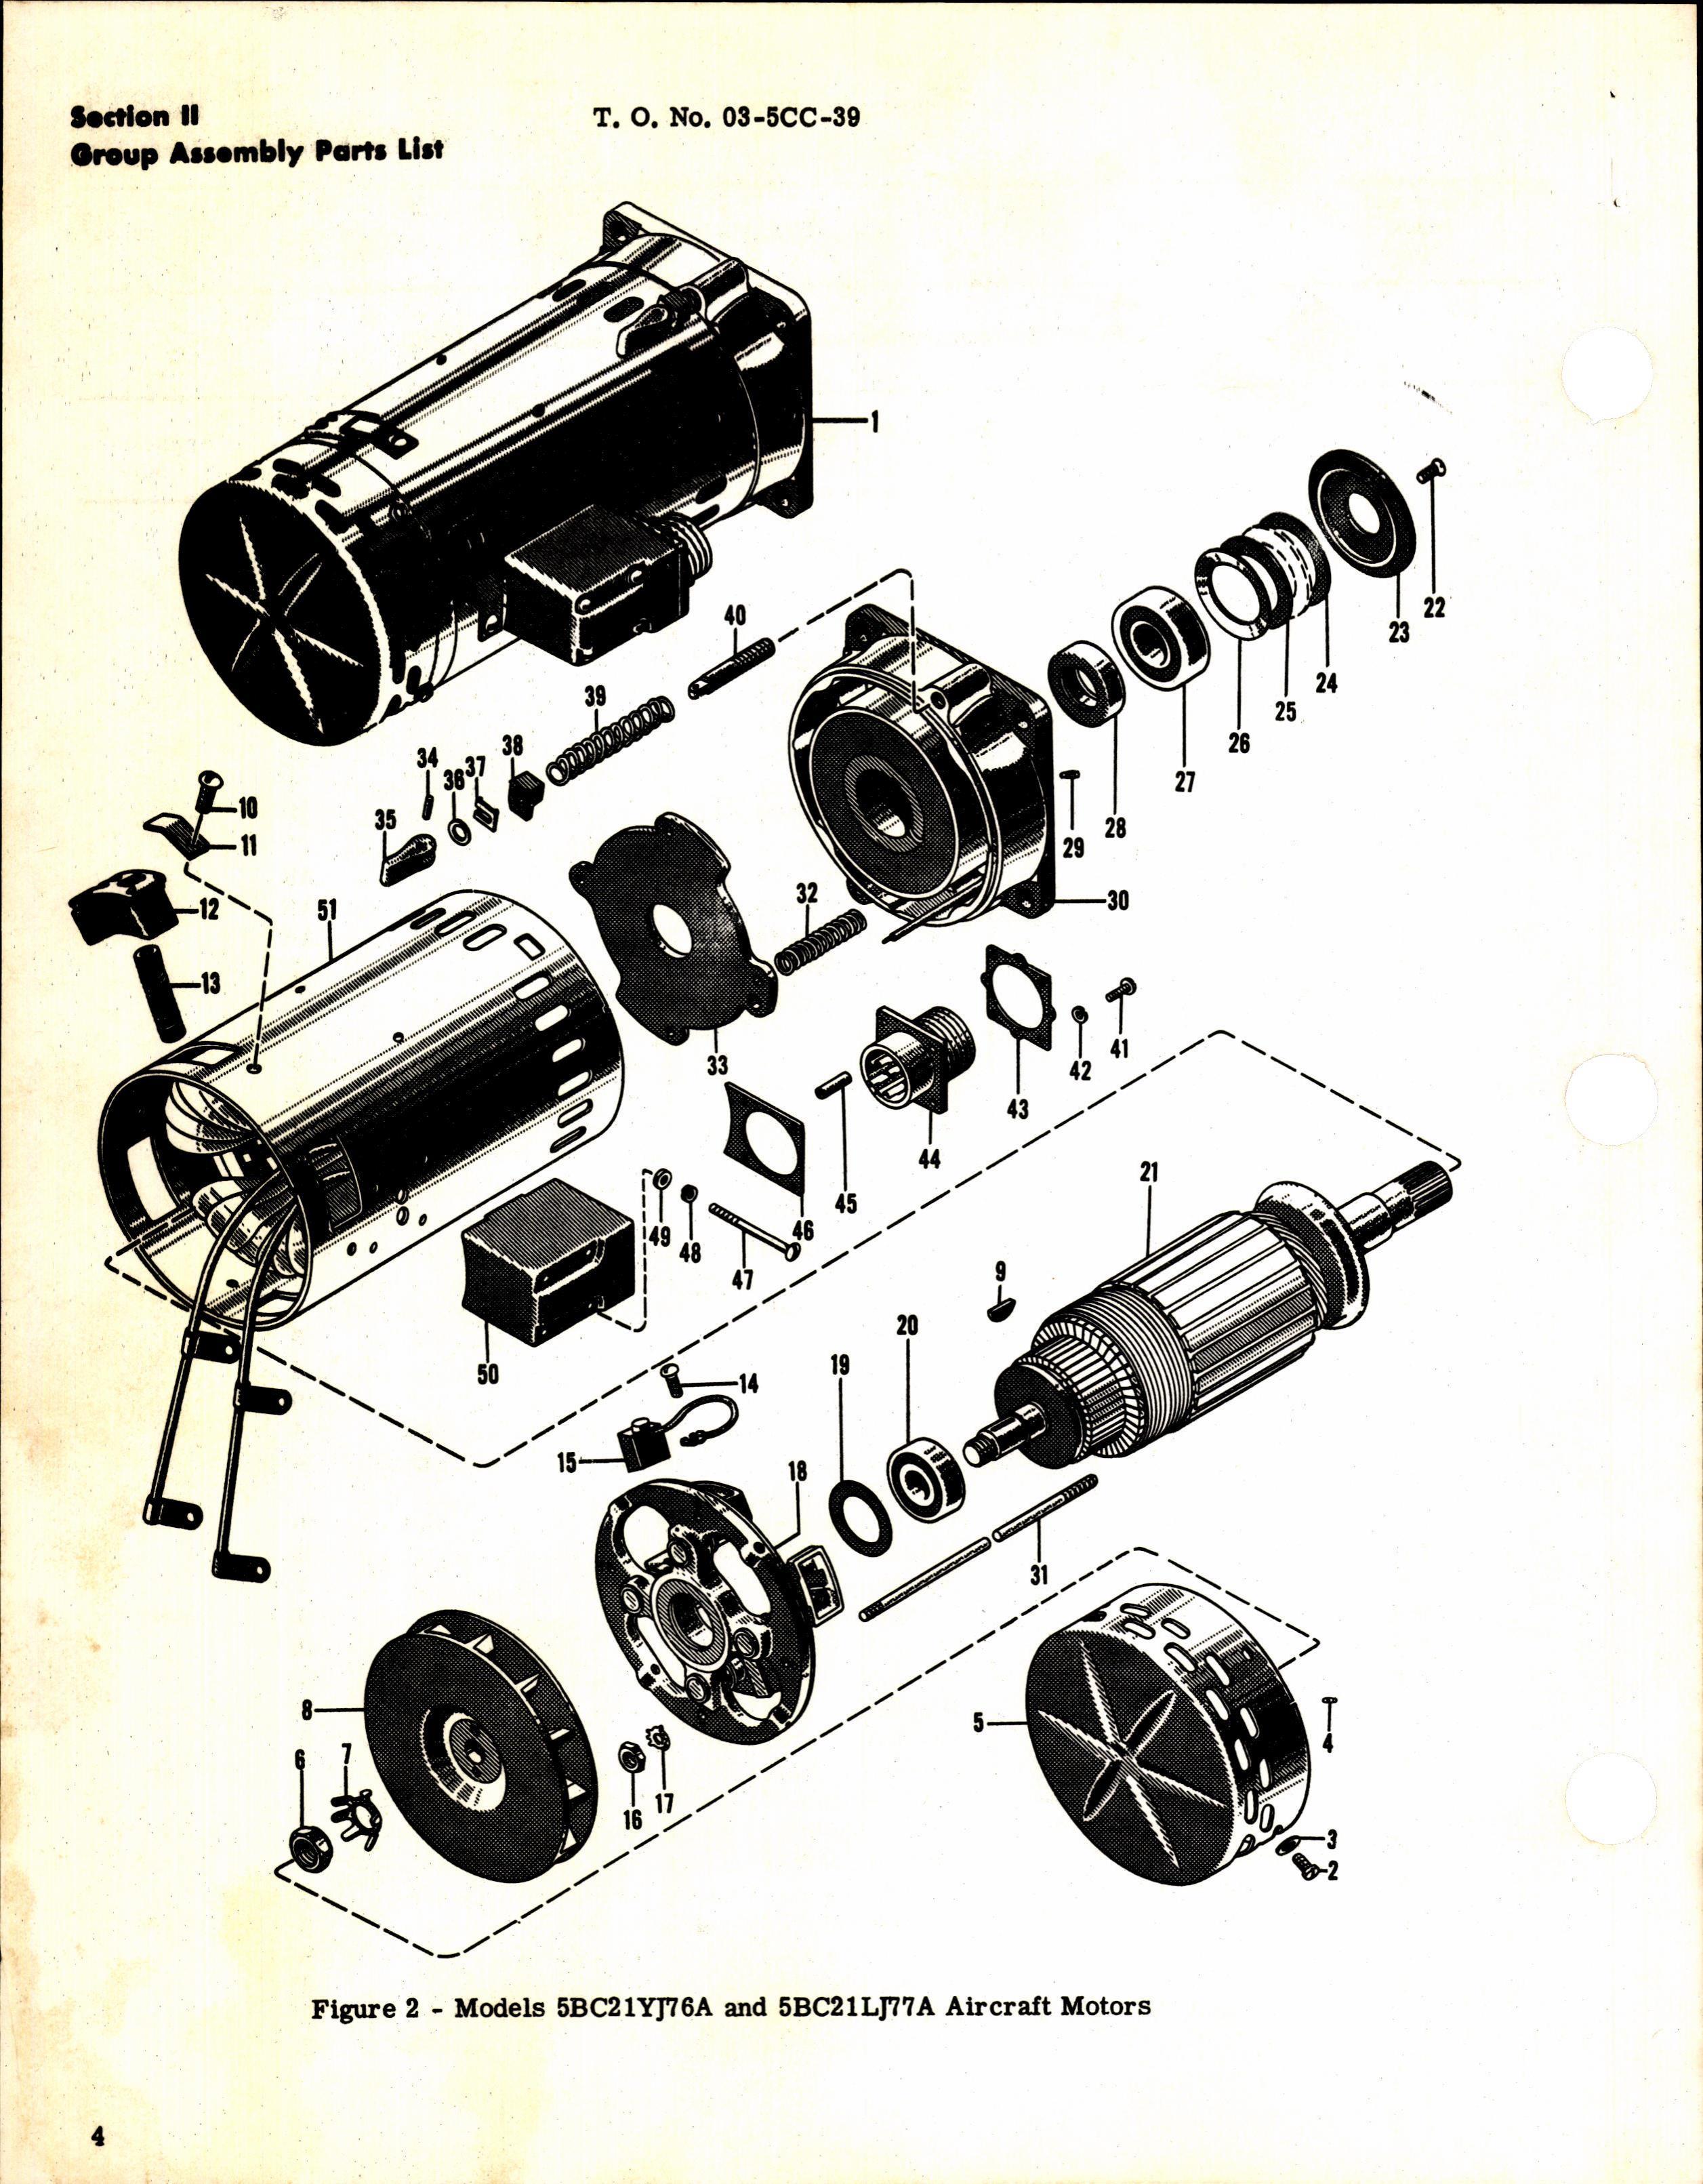 Sample page 6 from AirCorps Library document: Parts Catalog for General Electric Series 5BC21 Aircraft Motor